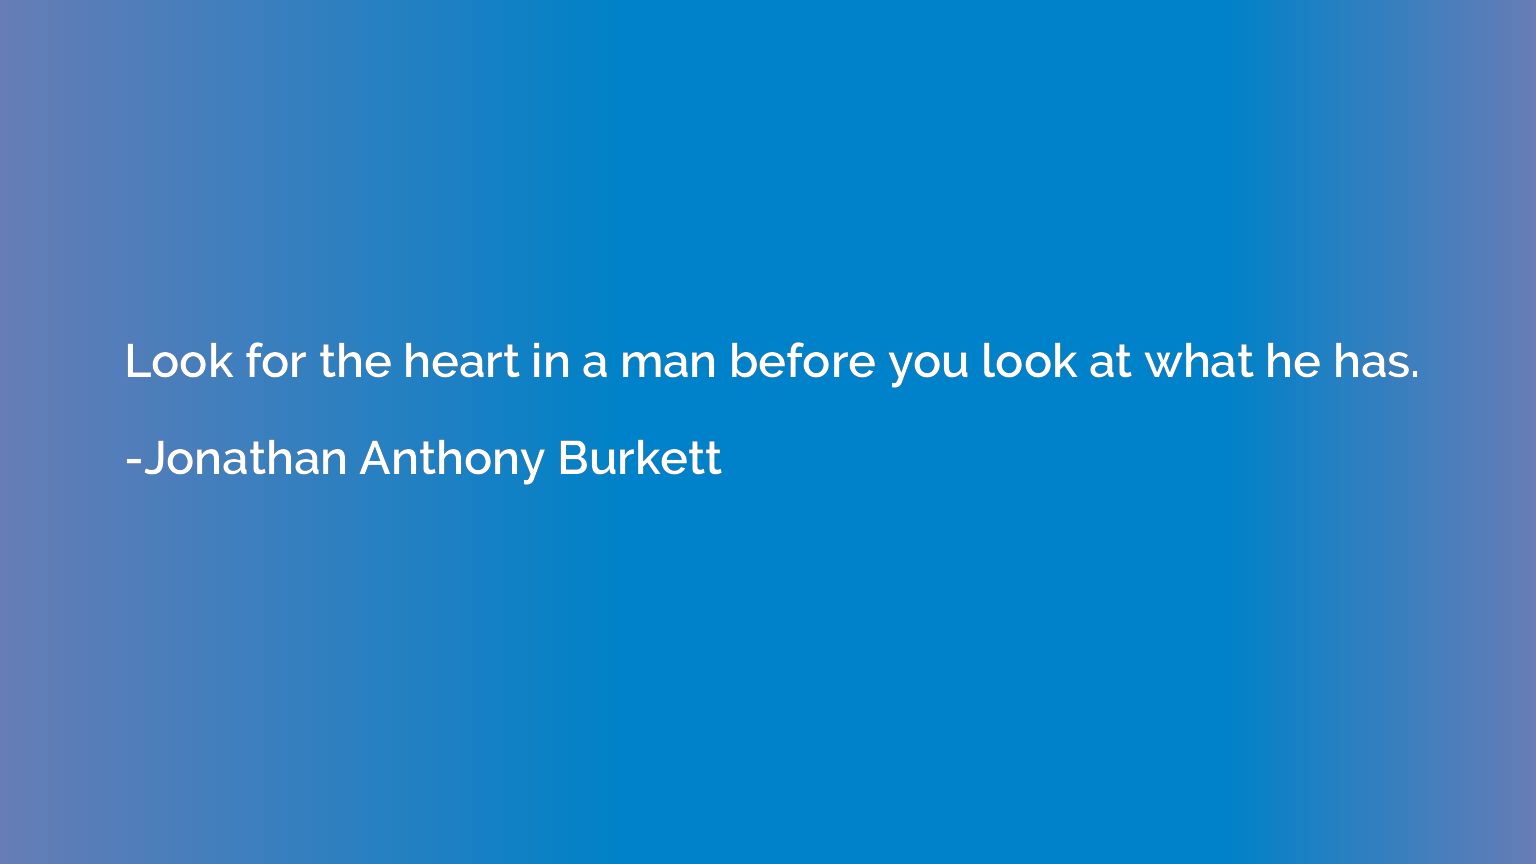 Look for the heart in a man before you look at what he has.